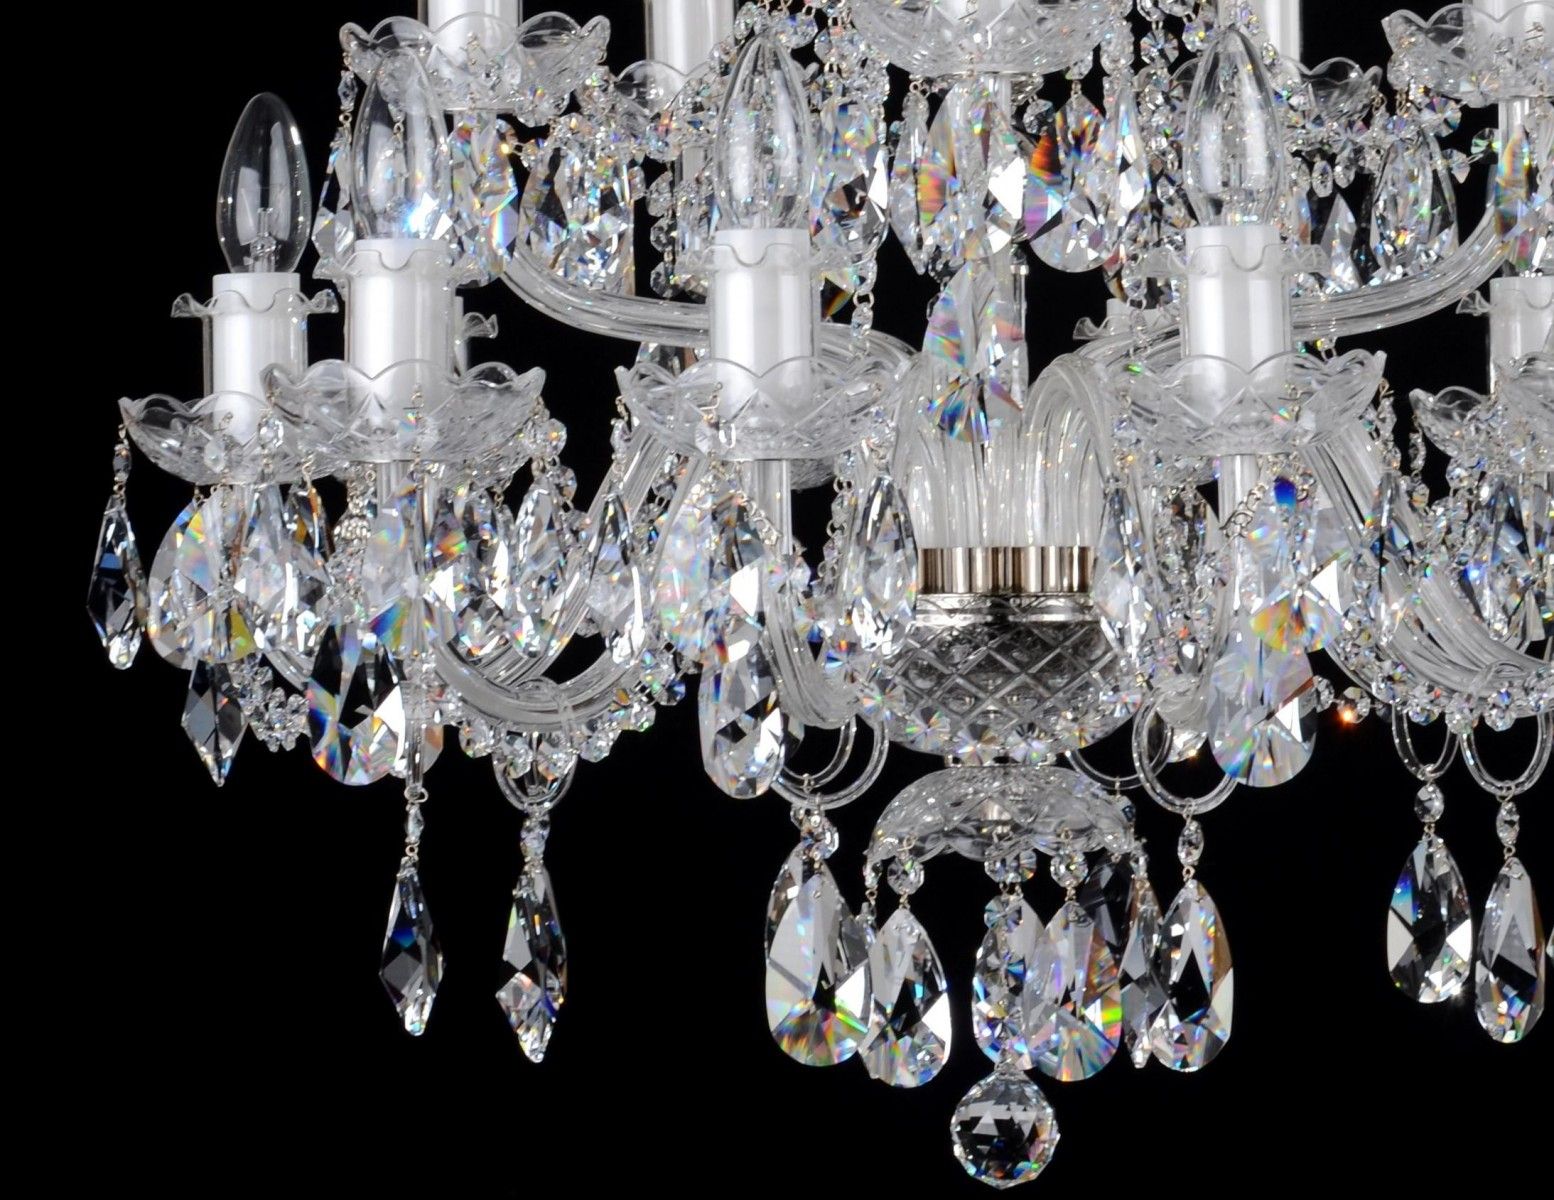 15 Arms Silver Crystal Chandelier With Swarovski Crystal With Soft Silver Crystal Chandeliers (View 8 of 15)